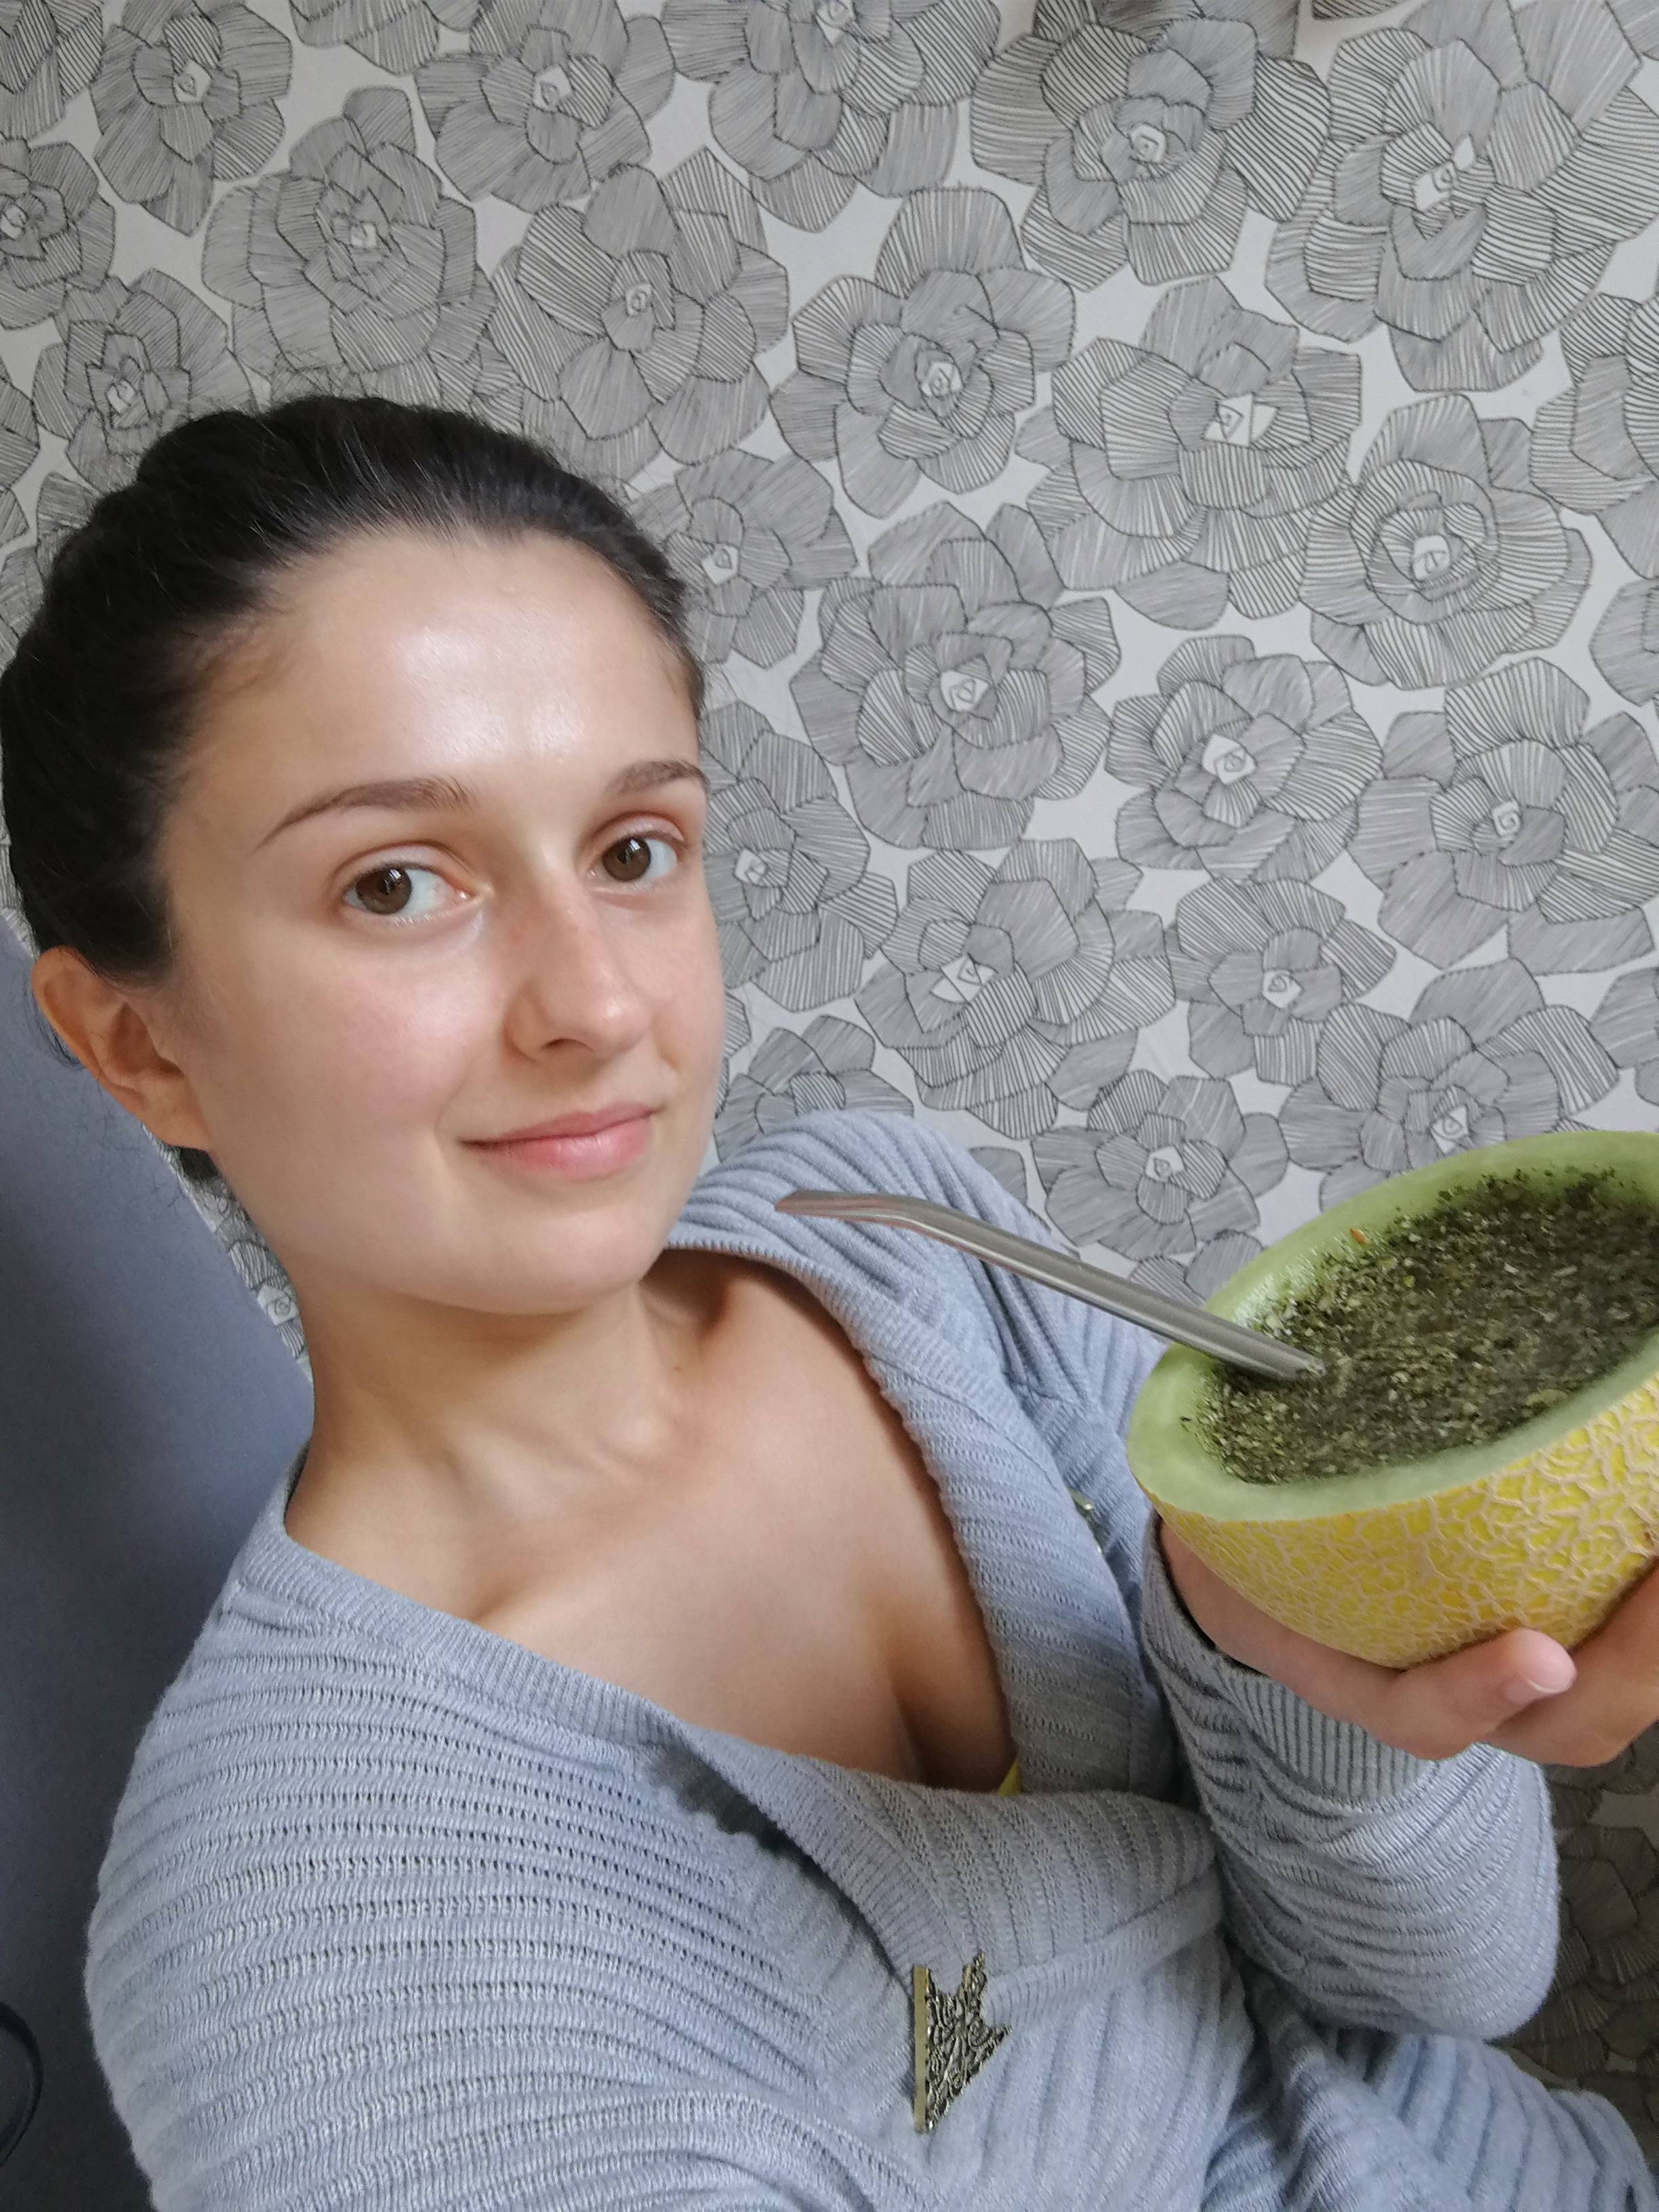 The quality of yerba mate makes a huge difference